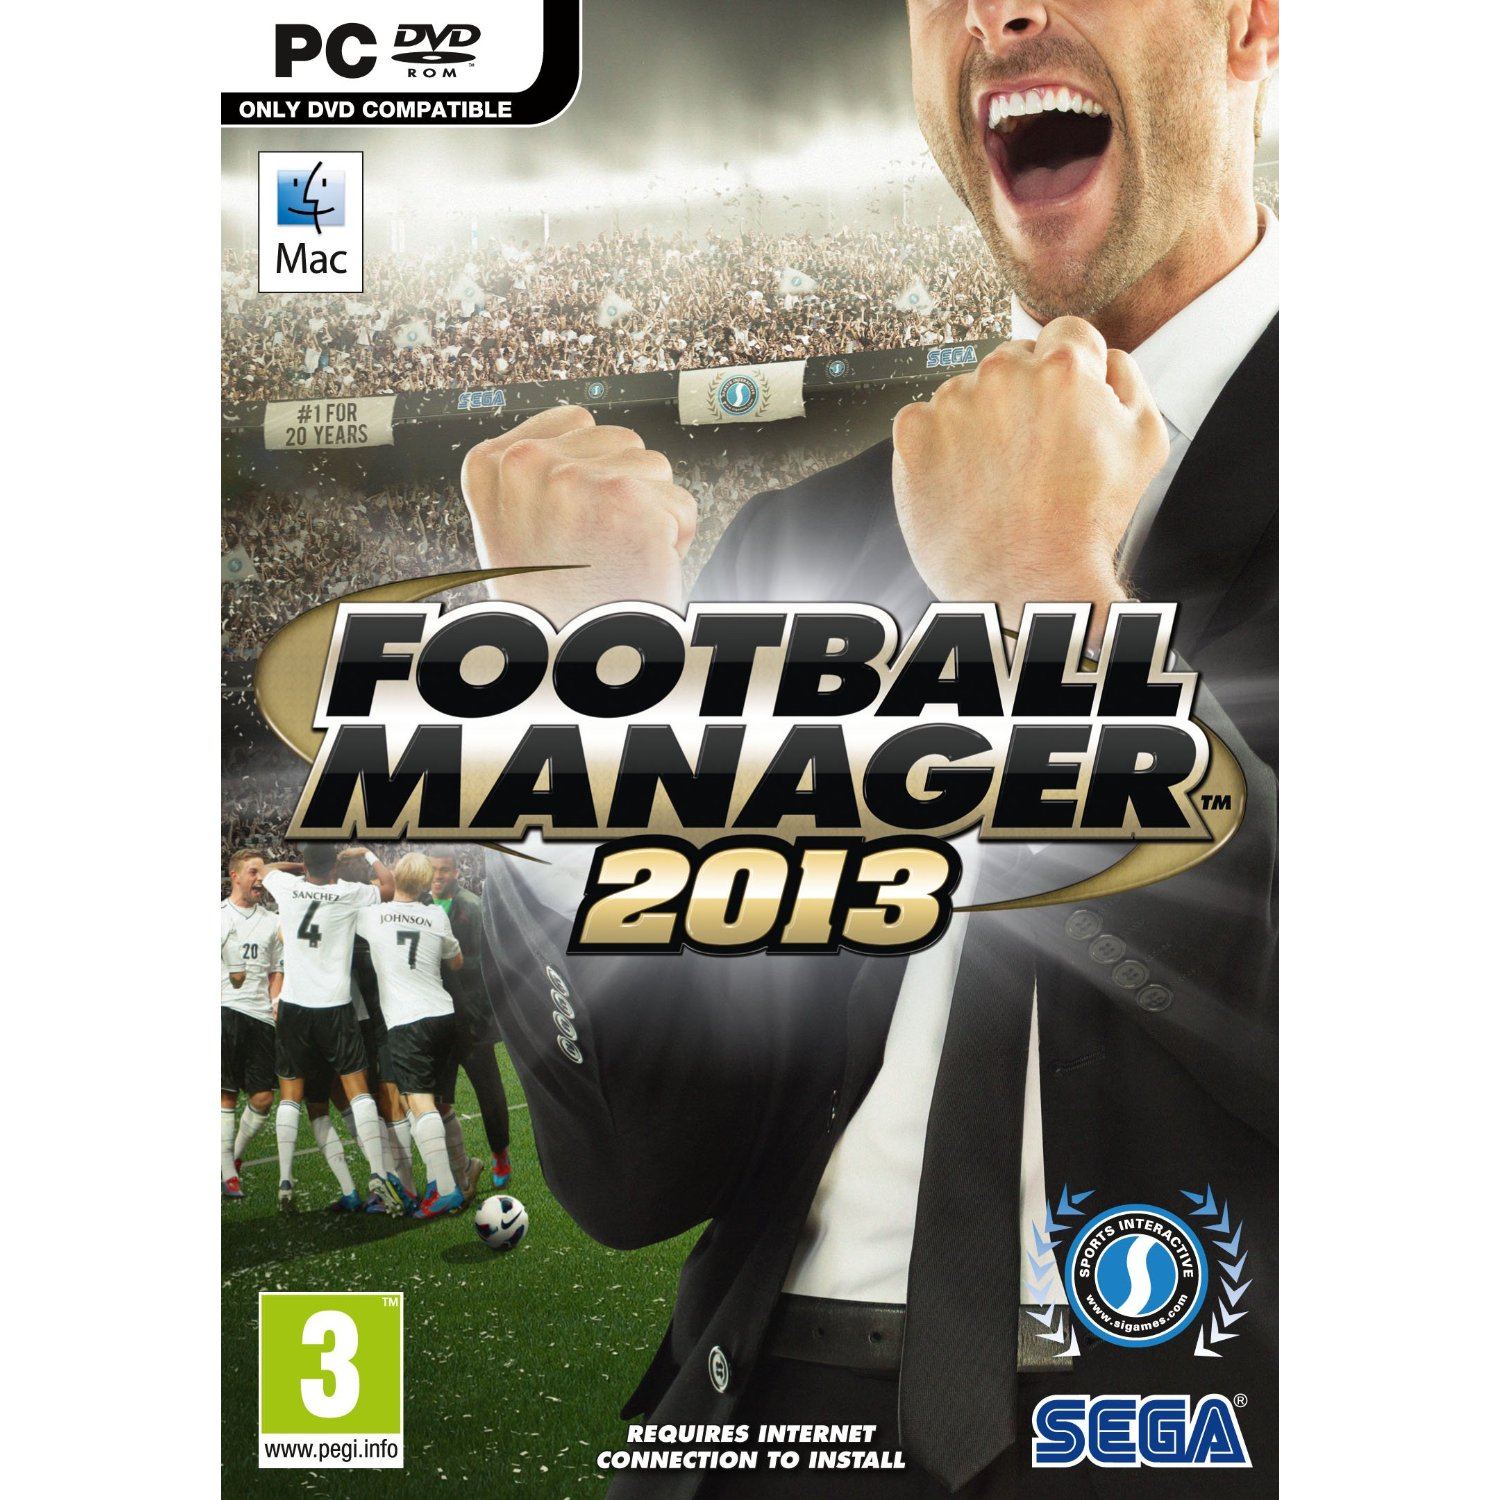 Football Manager 2013 – The Best Selling Game Of Football